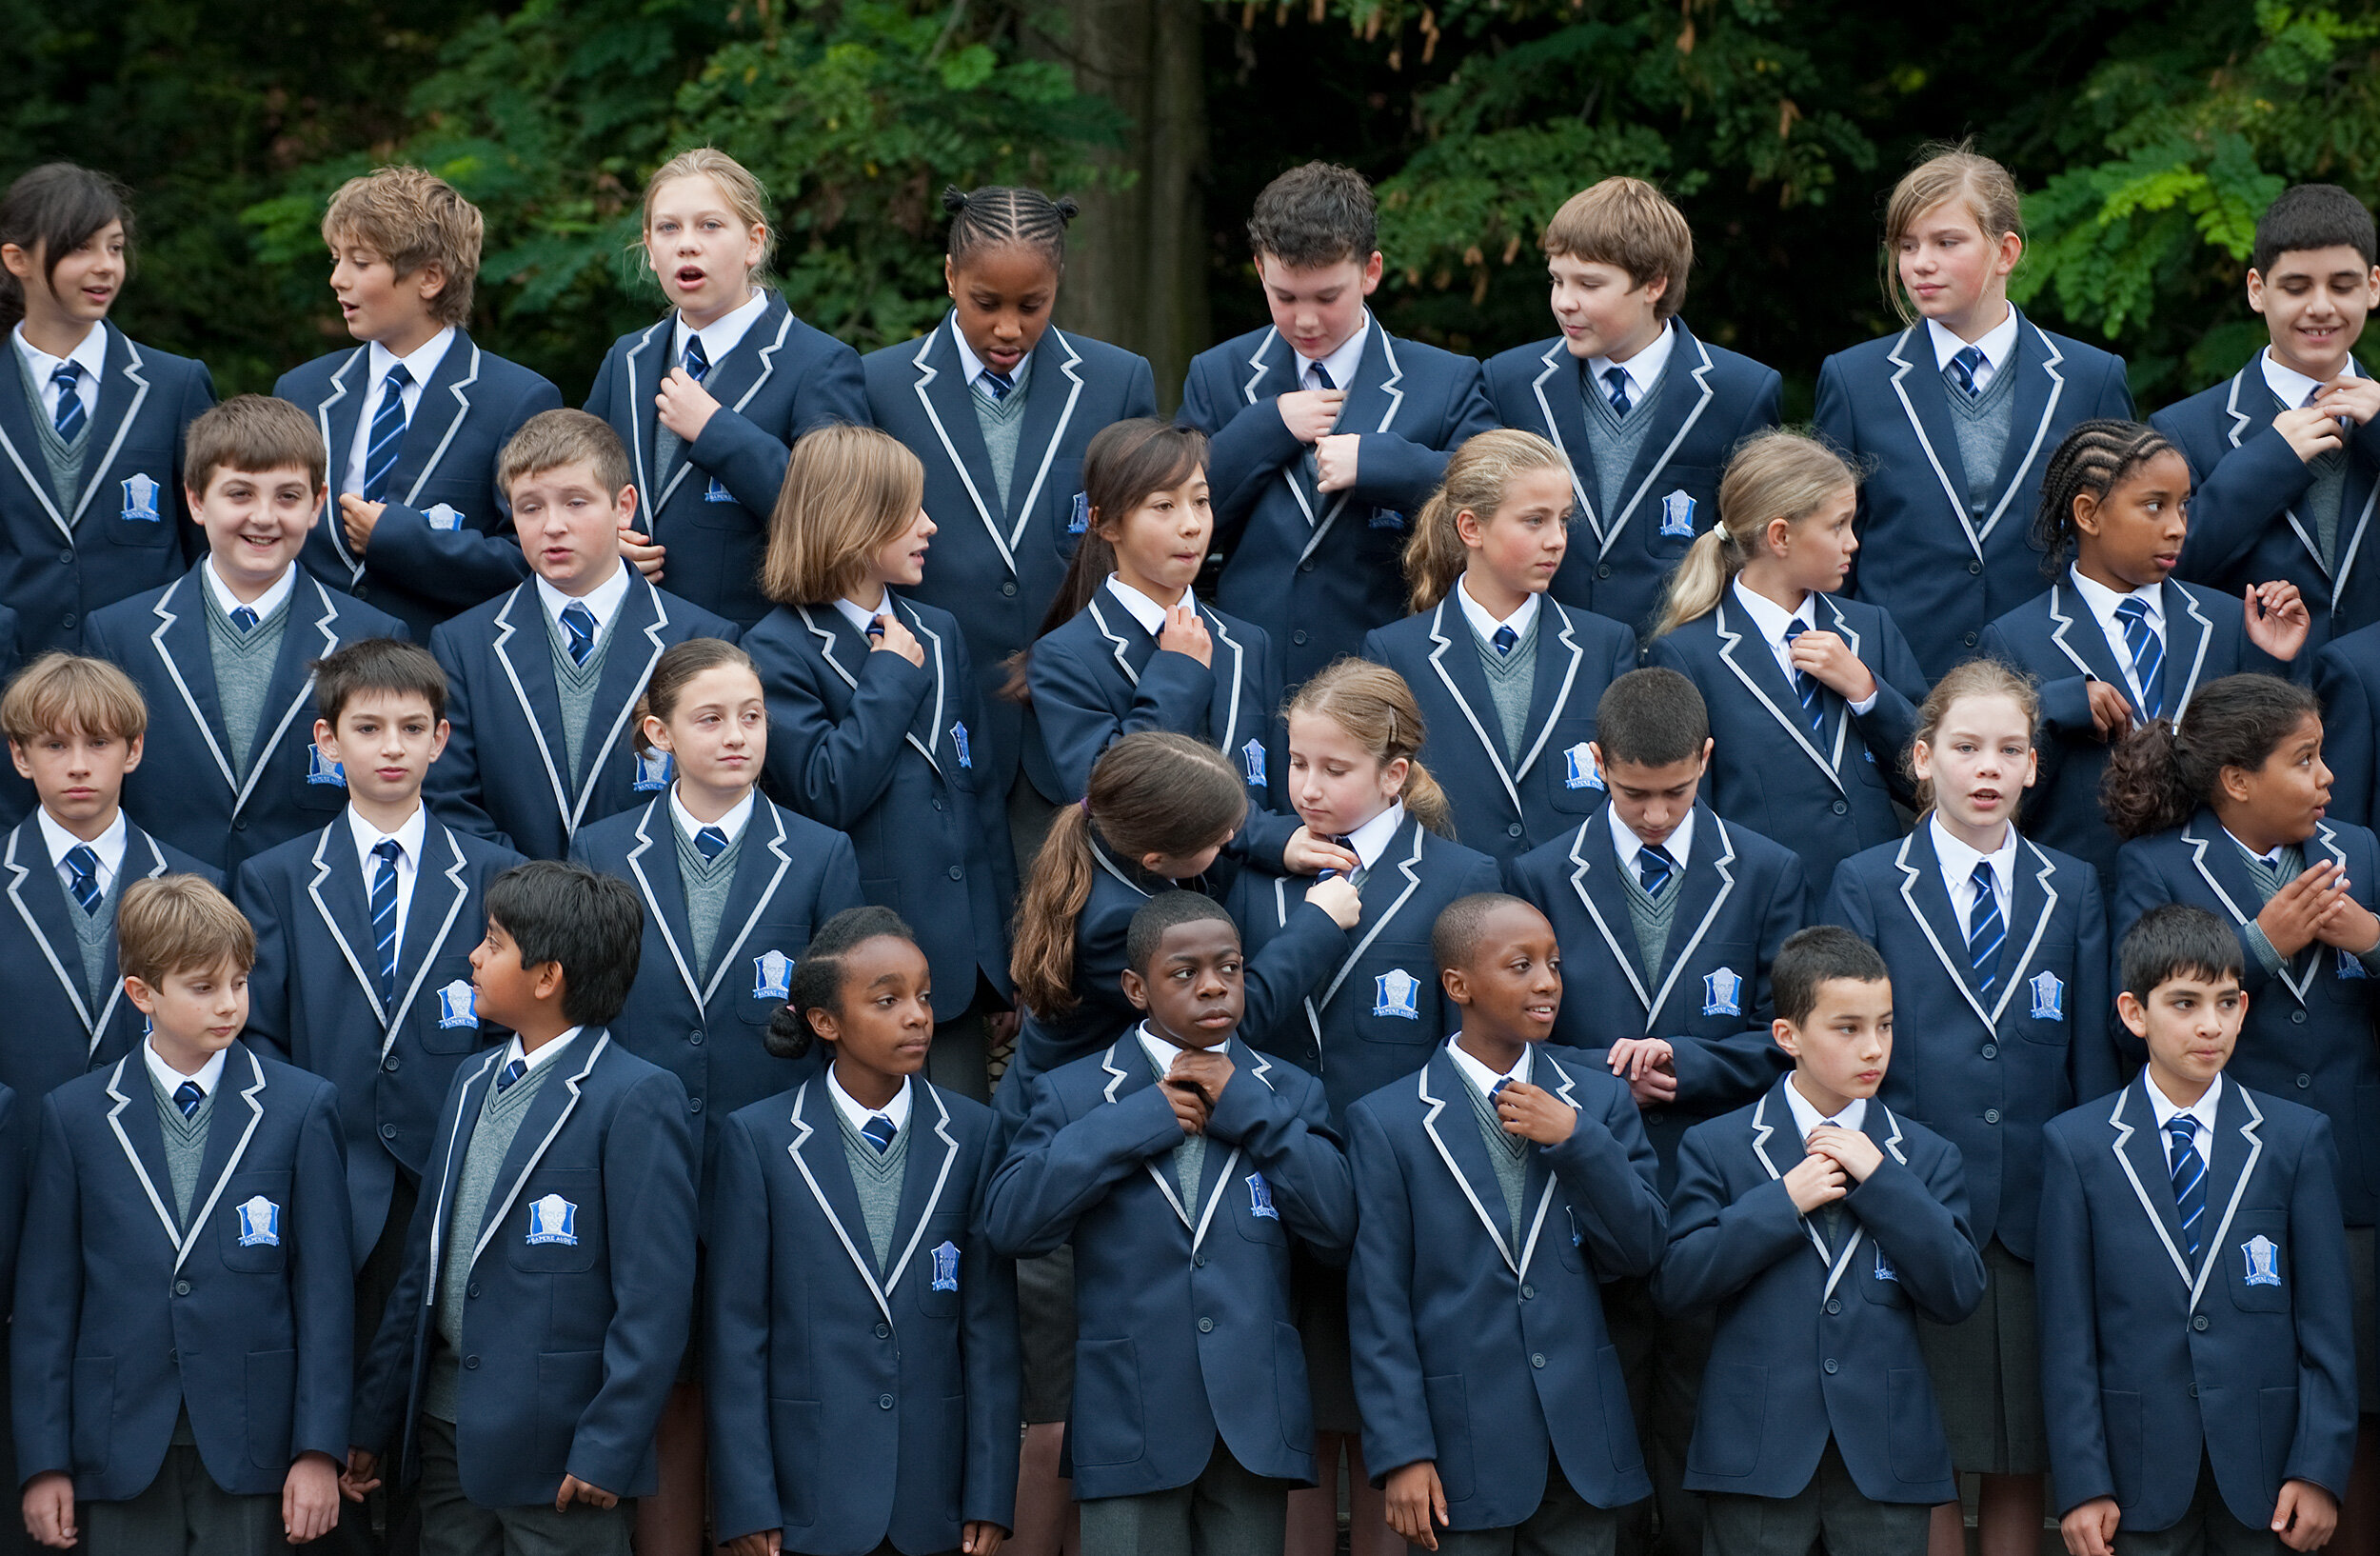  West London Free School, London W6, UK.  Lining up for whole school photo.  Shot by Eleanor Bentall photographer. 